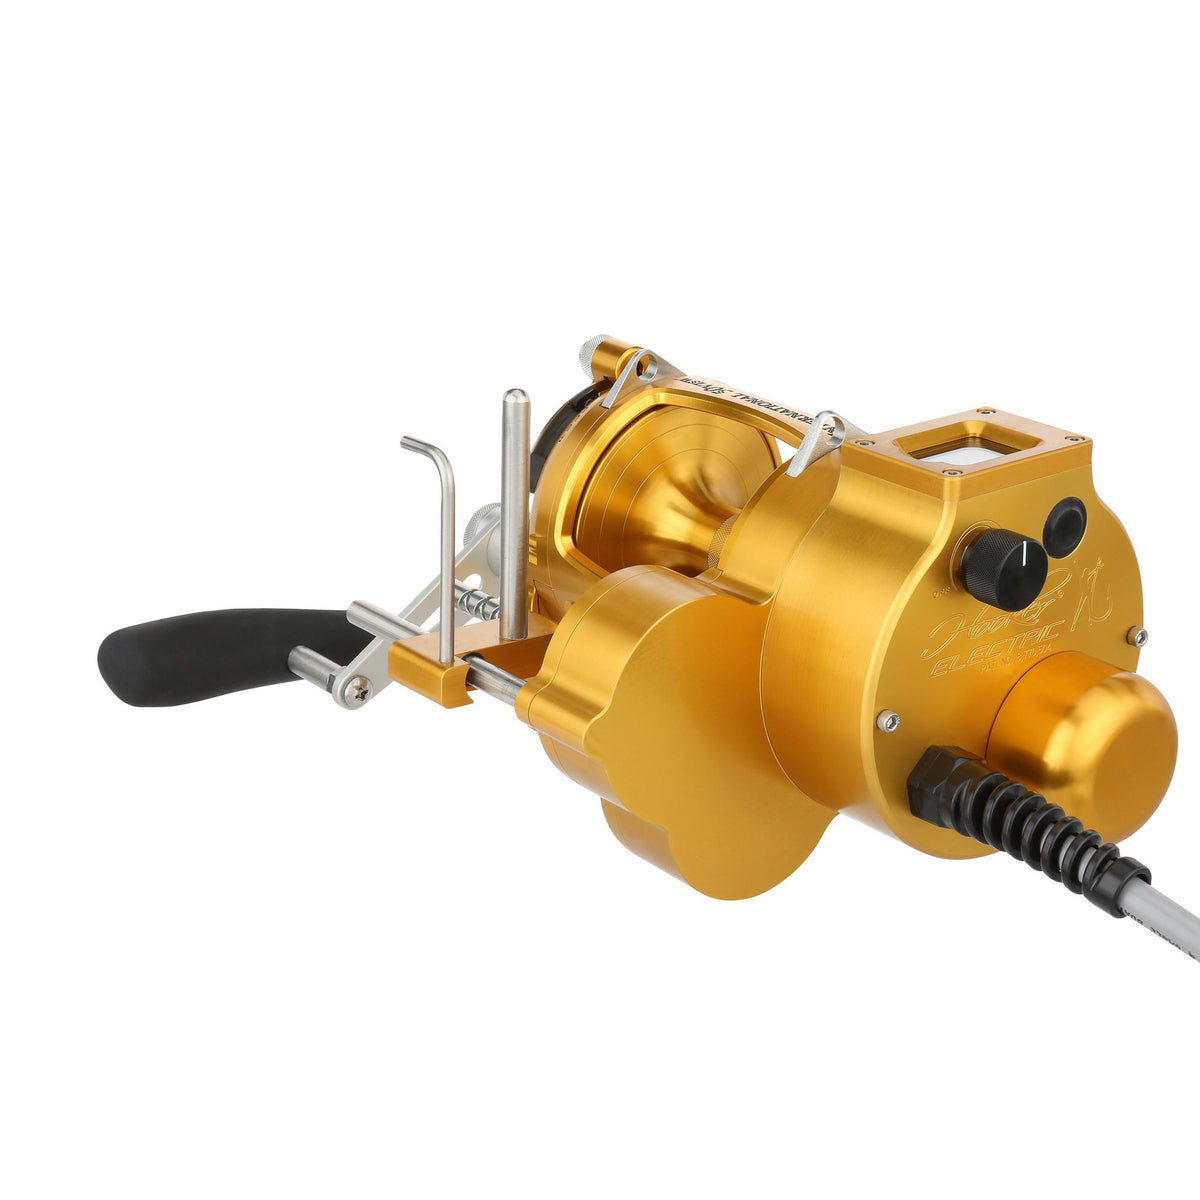 PENN International VI Hooker Electric 80 VISW Autostop Gold with FREE CHAOS  SW Series Rod and FREE Spooling from PENN/CHAOS - CHAOS Fishing